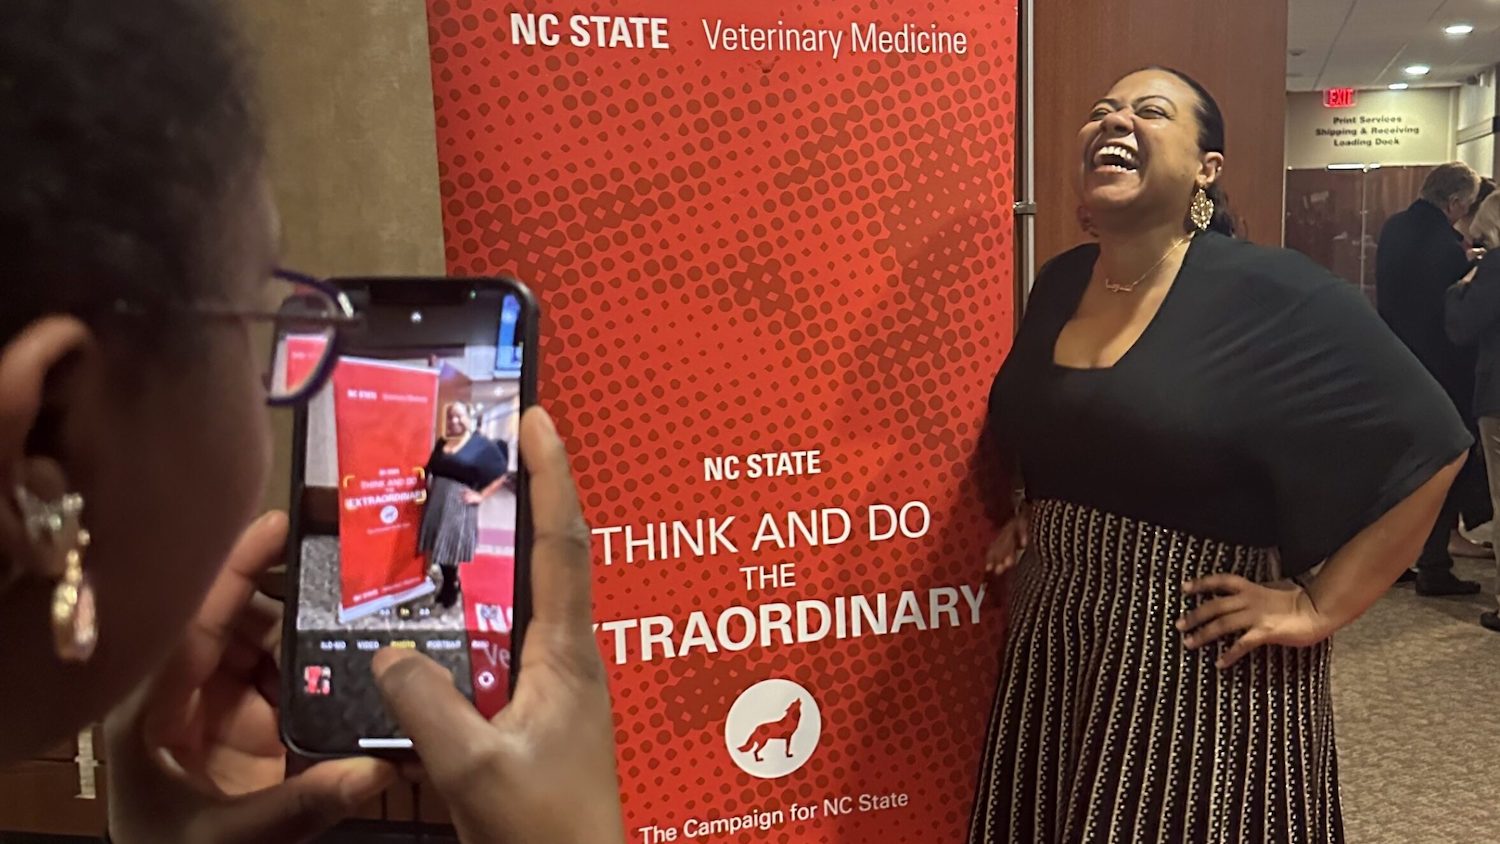 An NC State donor poses for a photo beside a university banner.